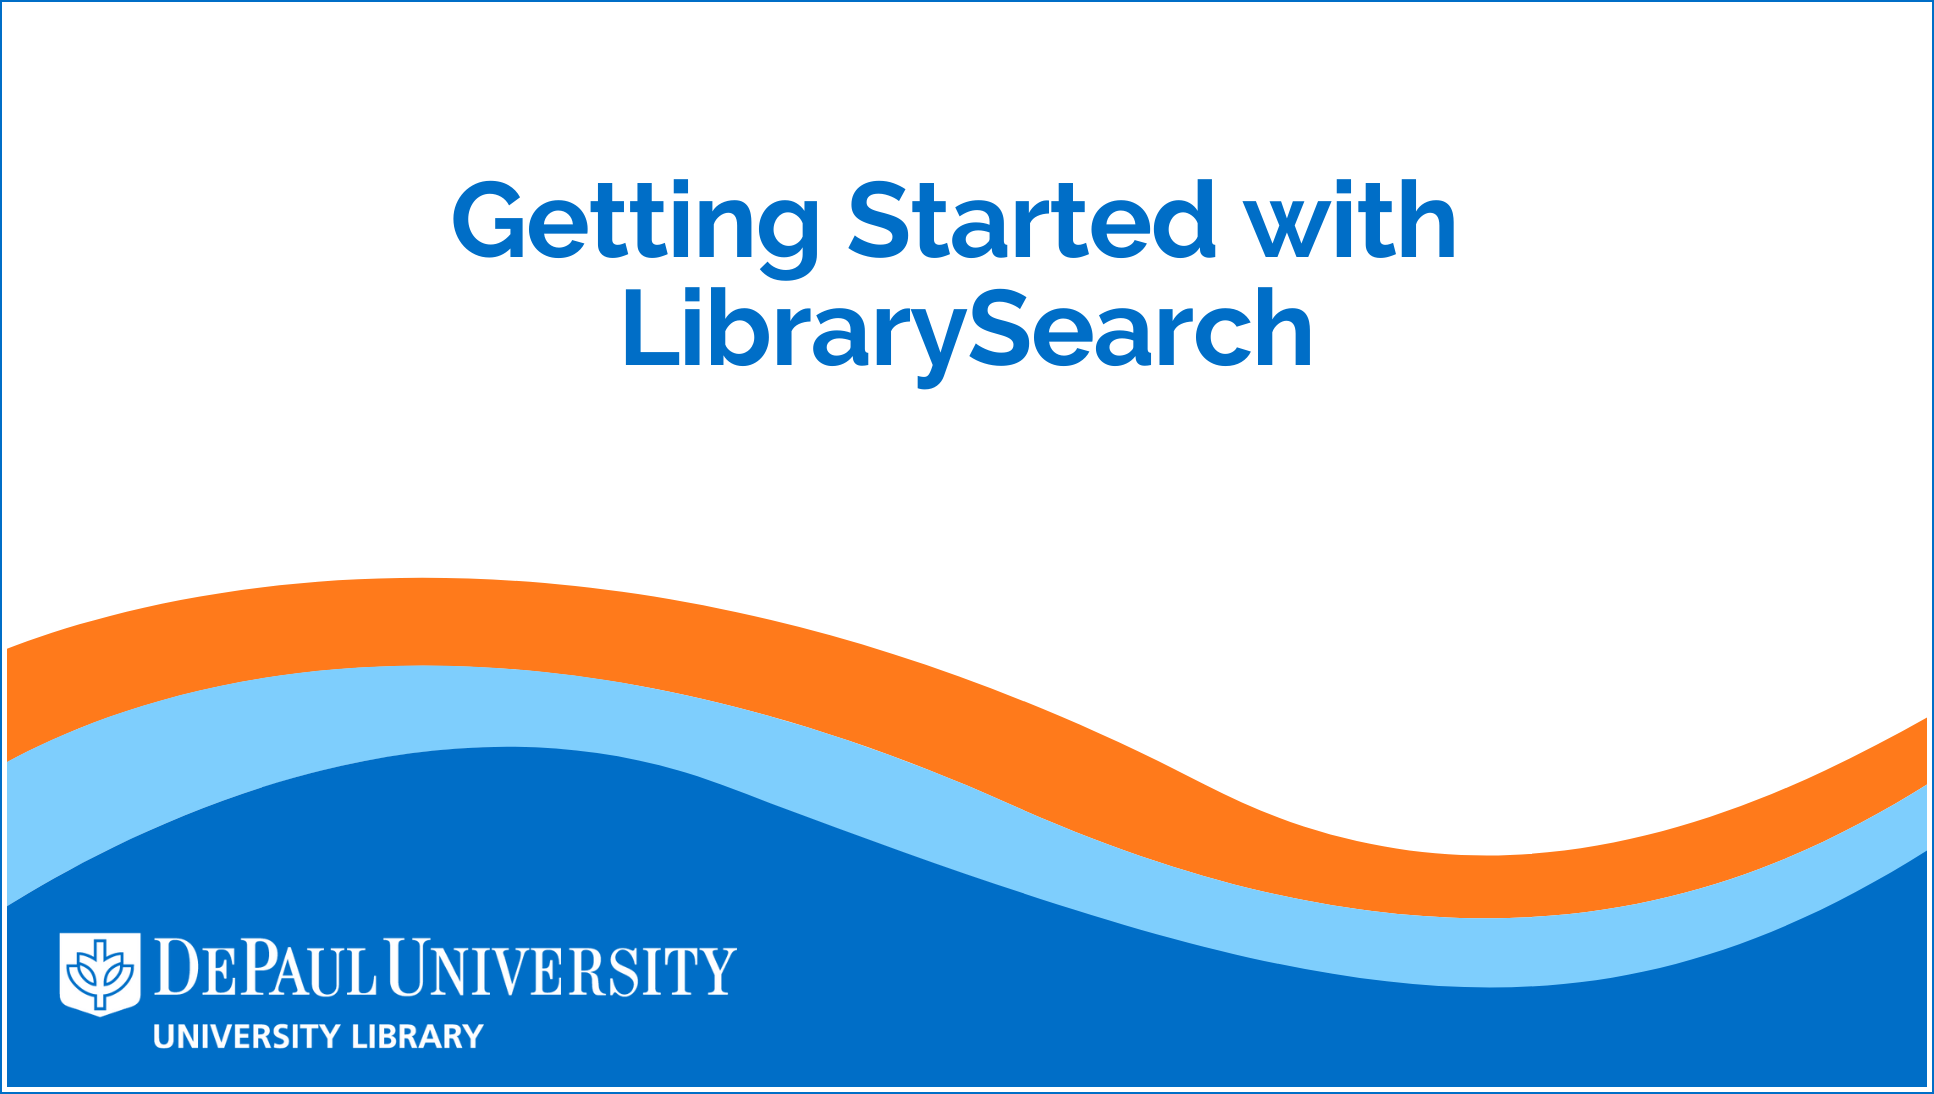 Getting Started with LibrarySearch